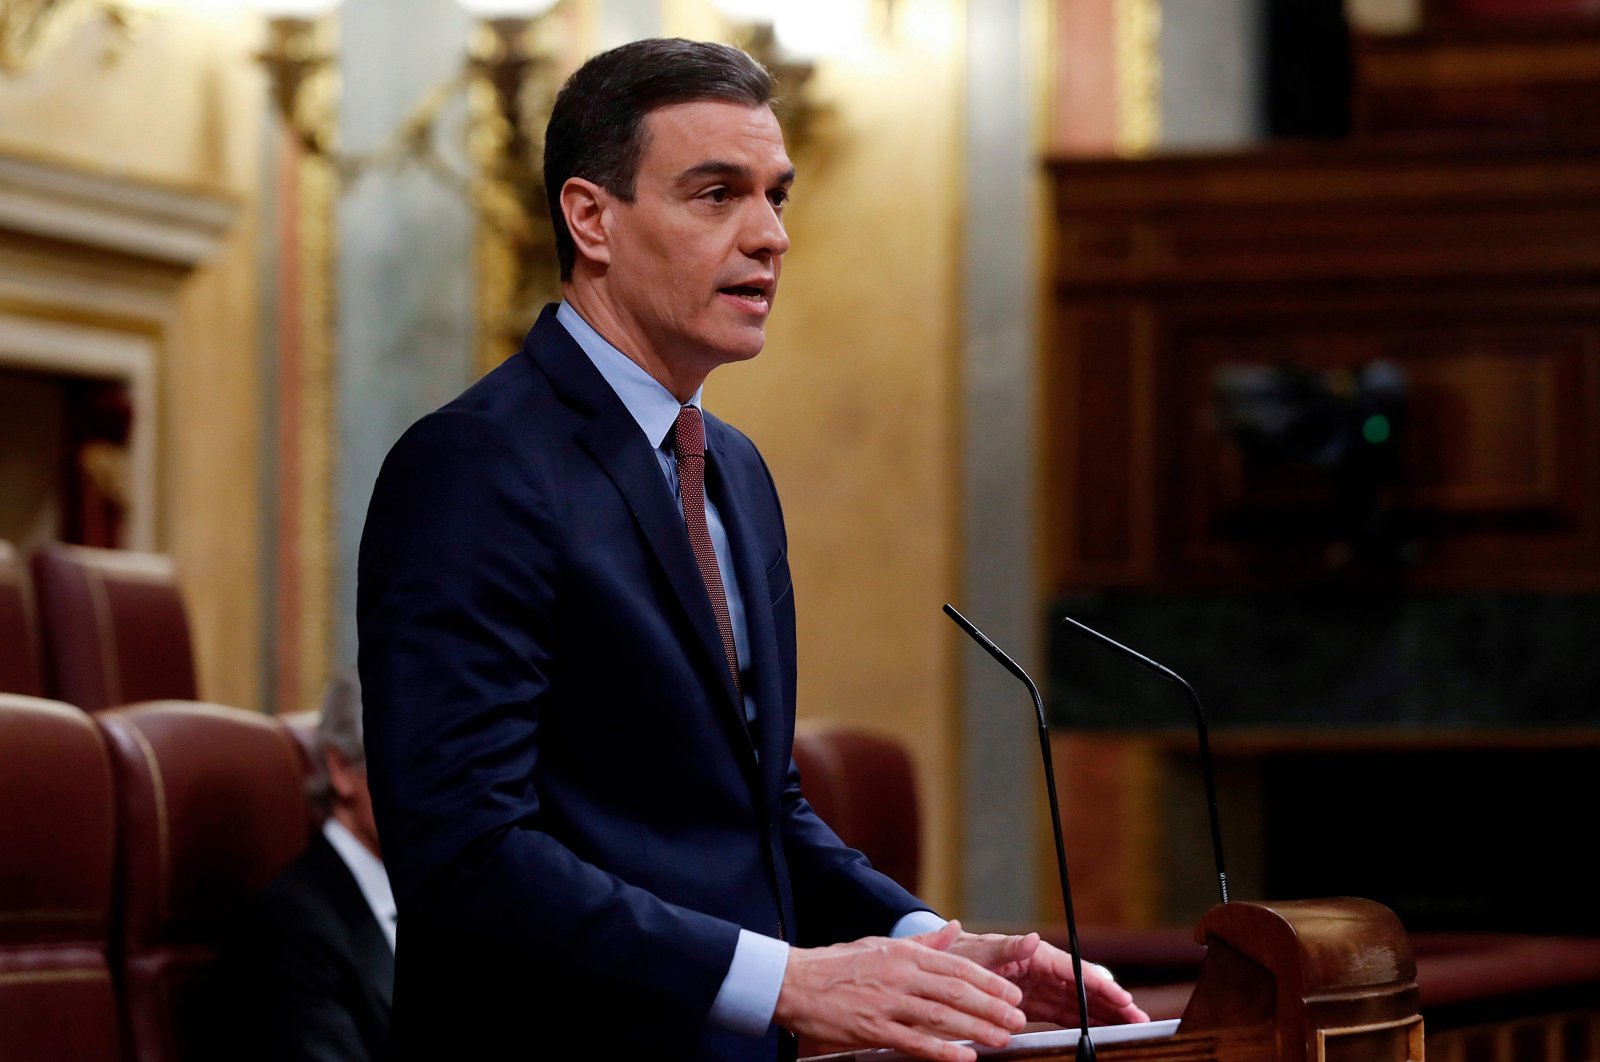 Spanish Prime Minister Pedro Sanchez delivers a speech during a session to debate the extension of a national lockdown to curb the spread of the coronavirus at the Lower Chamber of the Spanish parliament in Madrid, May 6, 2020. (AFP Photo)